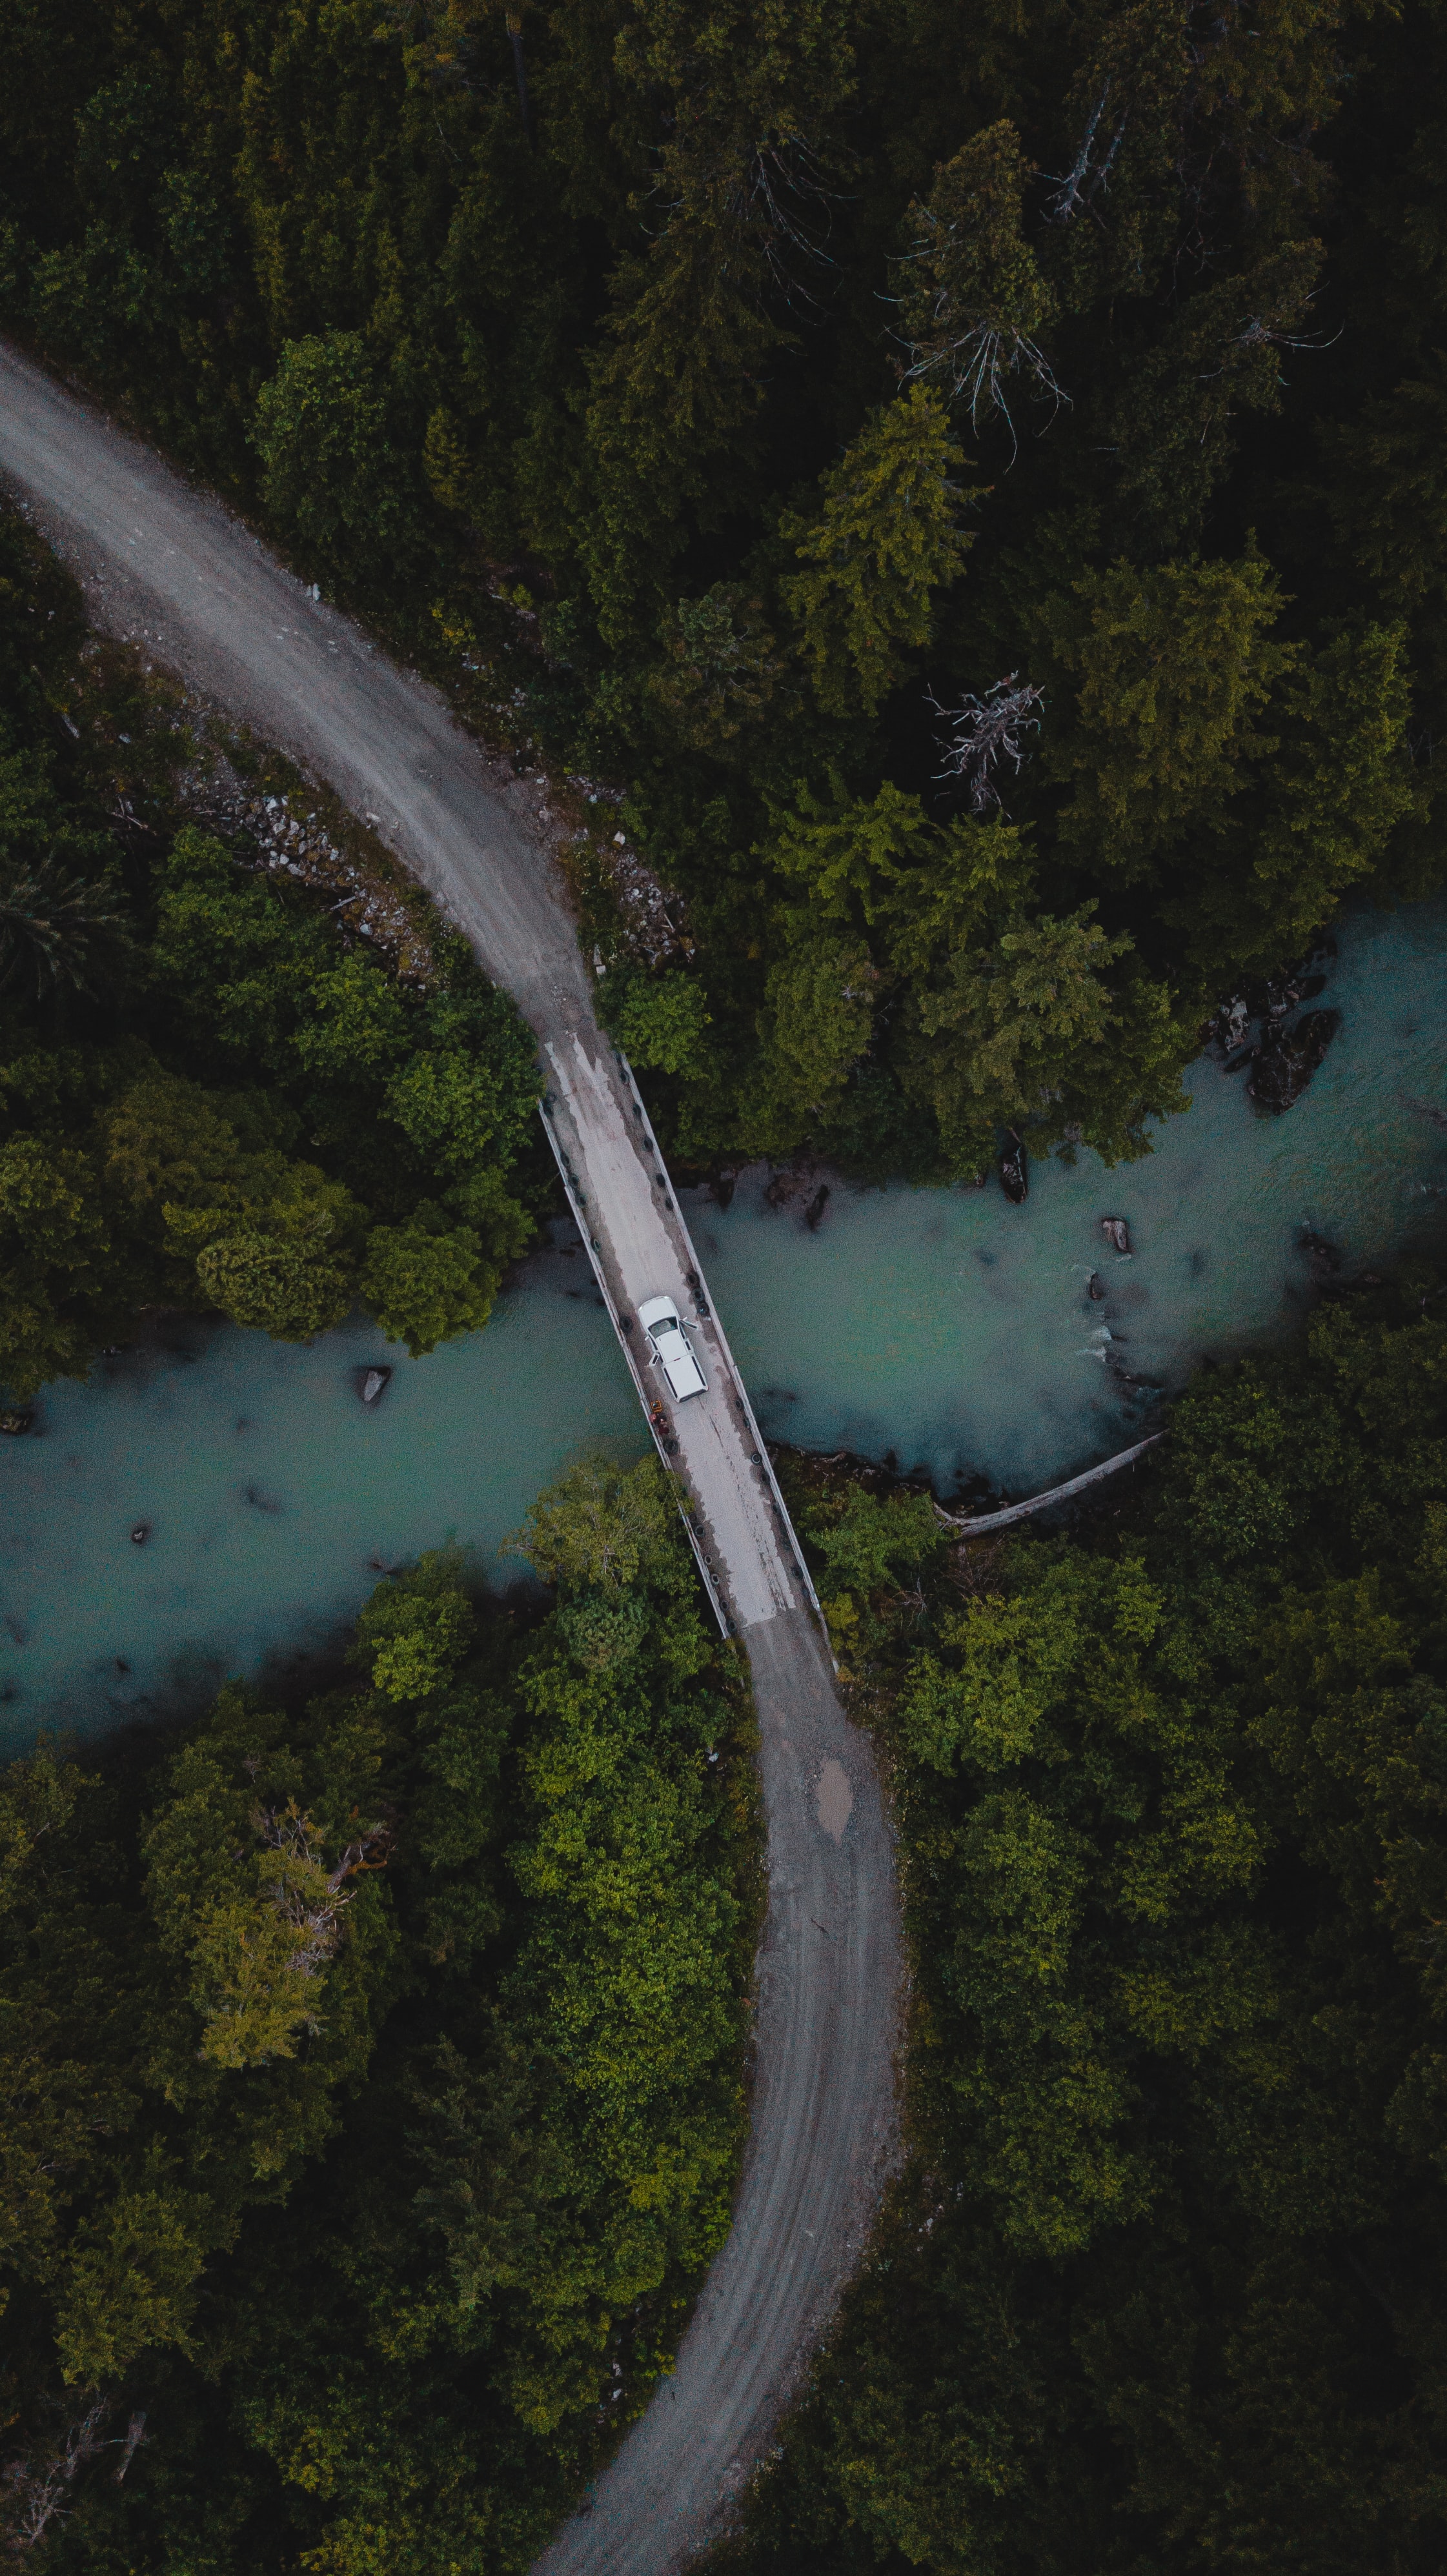 rivers, nature, trees, view from above, forest, car, machine, bridge